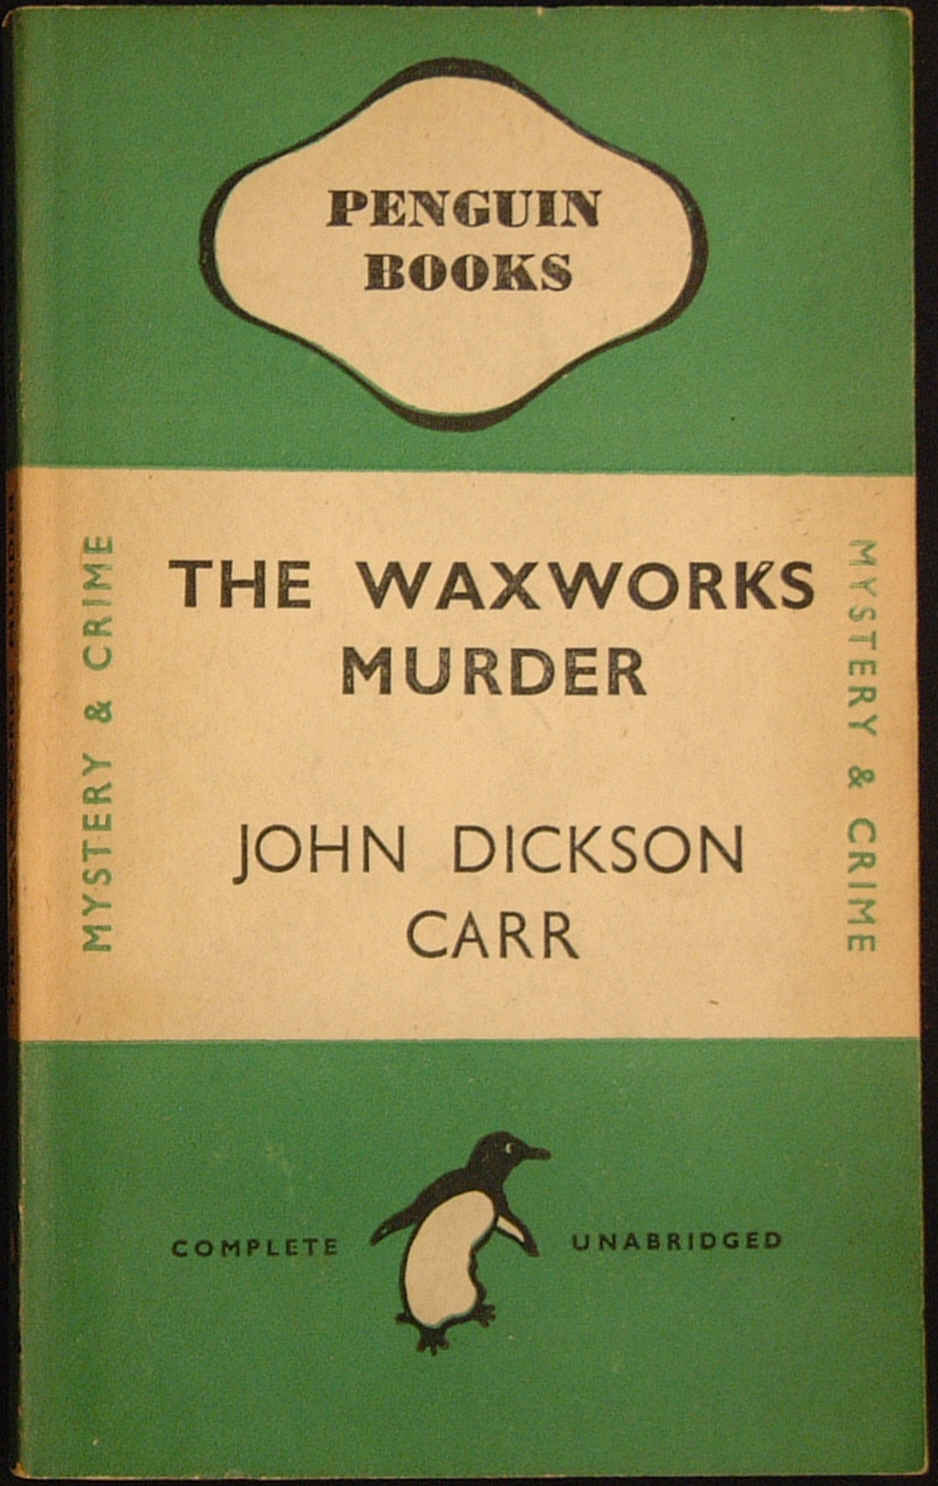 Penguin First Editions :: Early First Edition Penguin Books ...